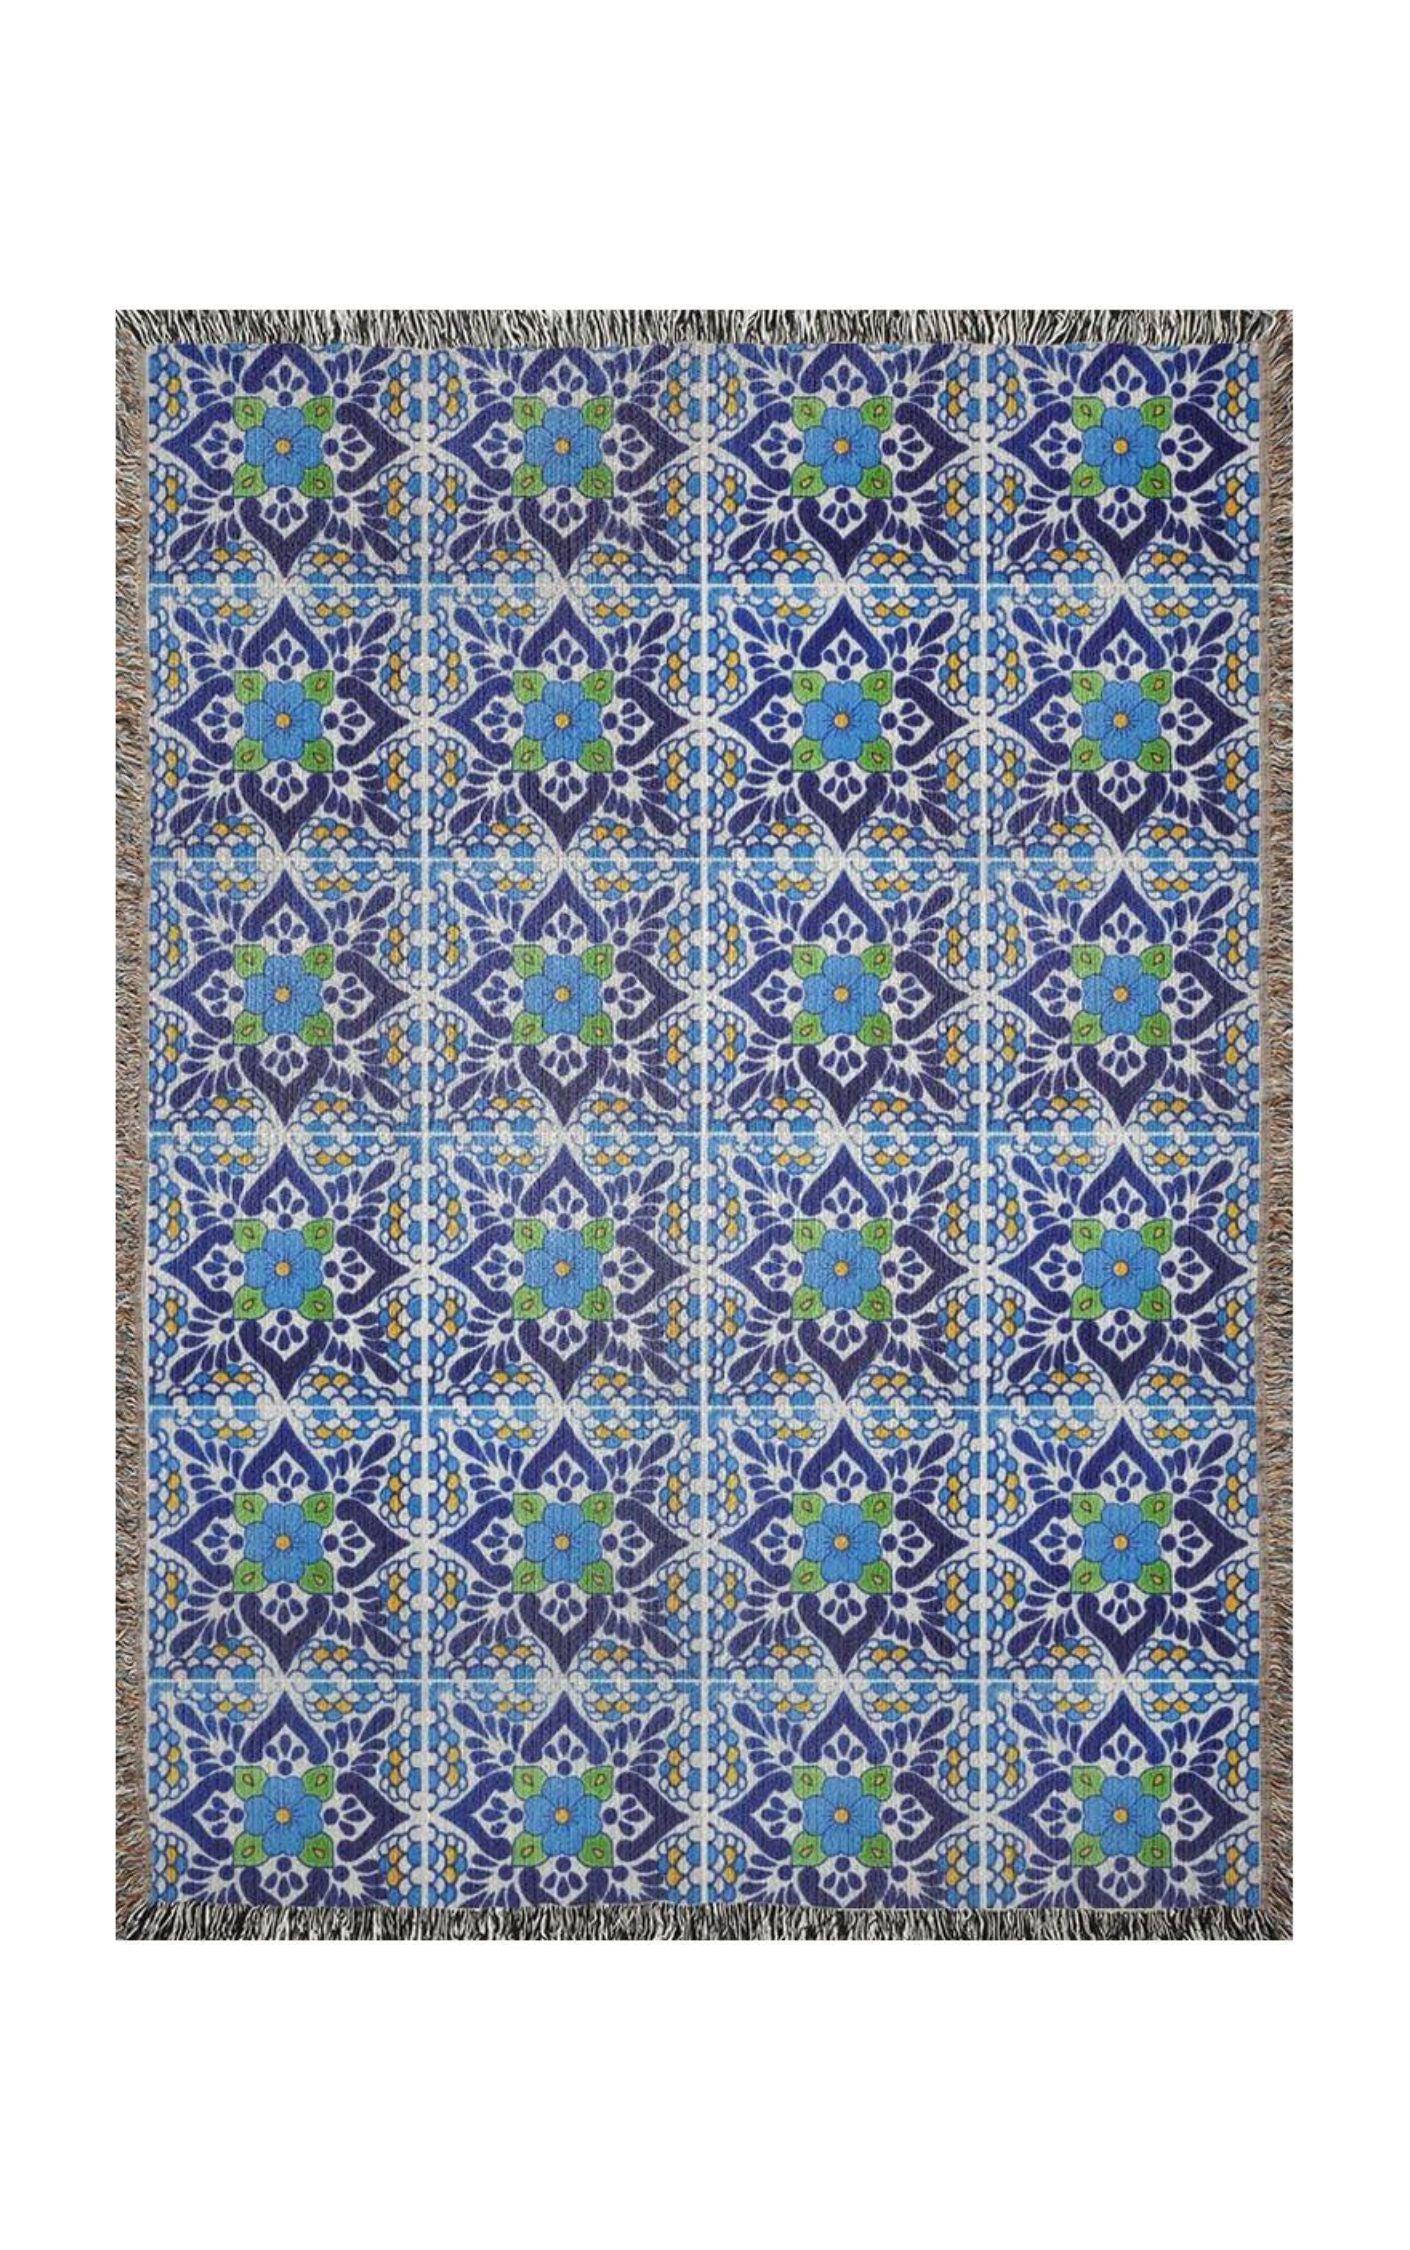 Floral blue tiles woven blanket 50x60” clearance